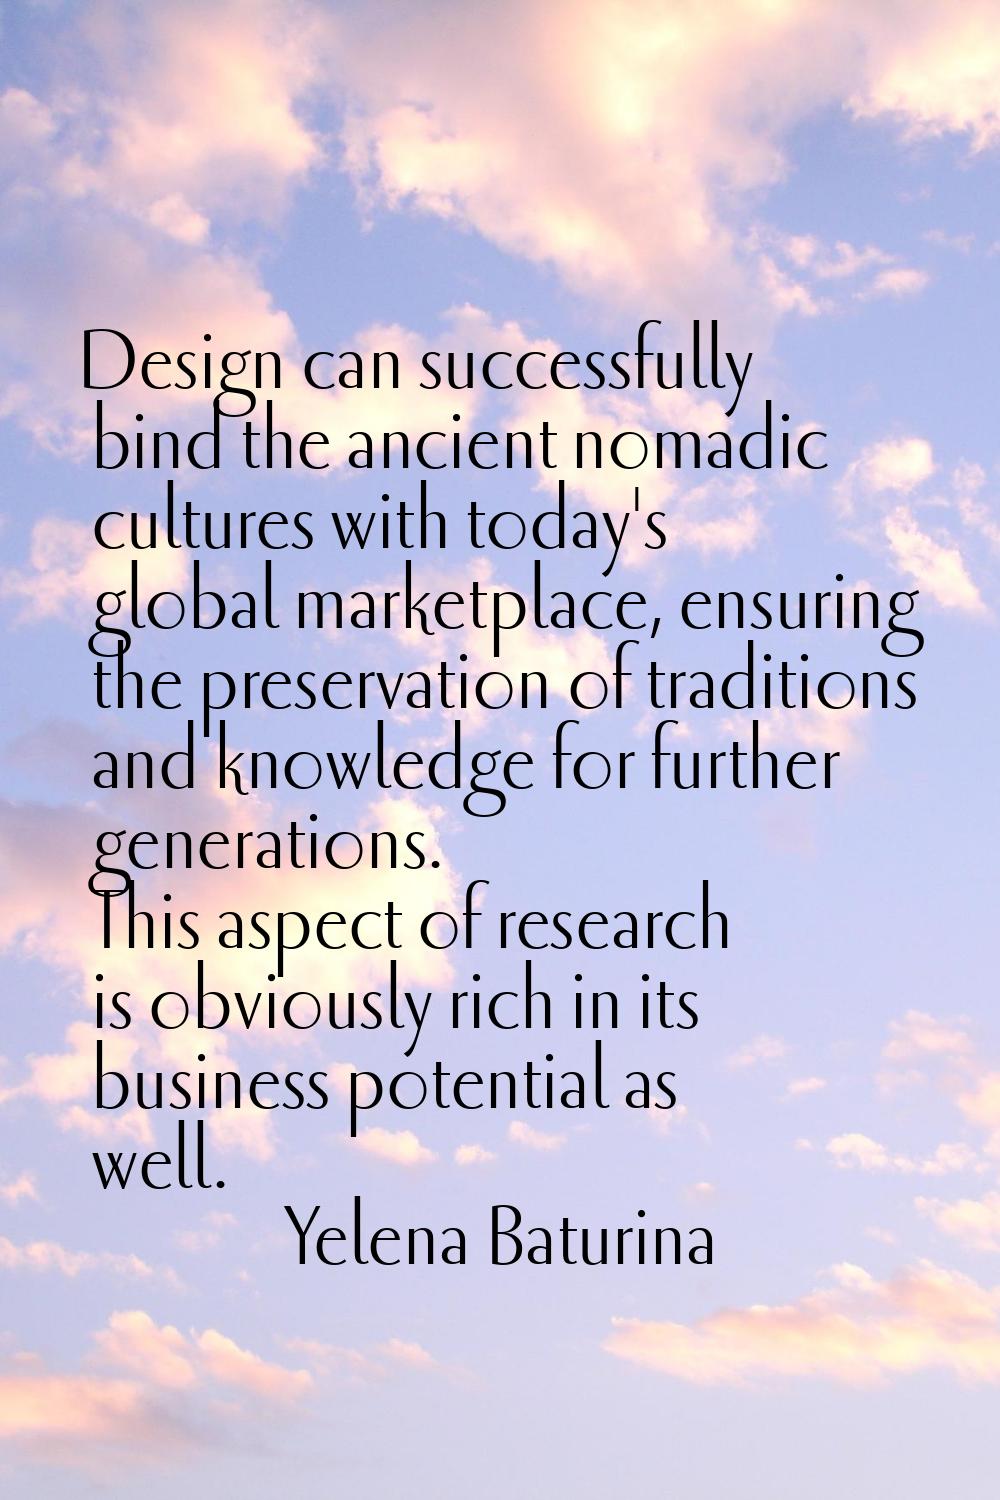 Design can successfully bind the ancient nomadic cultures with today's global marketplace, ensuring